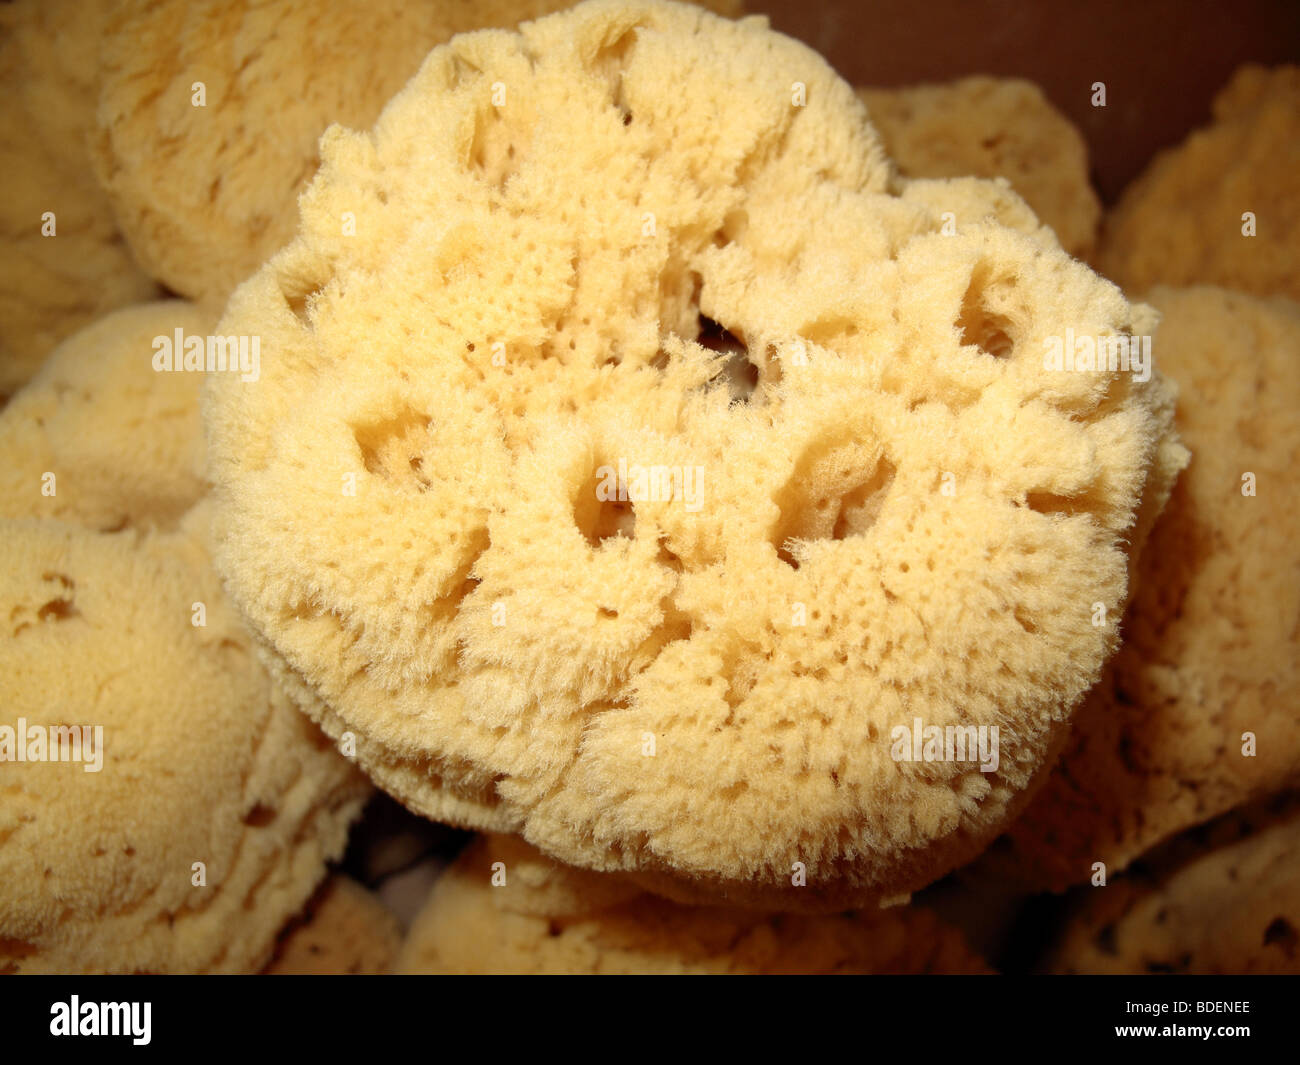 a natural commercial sea sponge for sale in a market Stock Photo